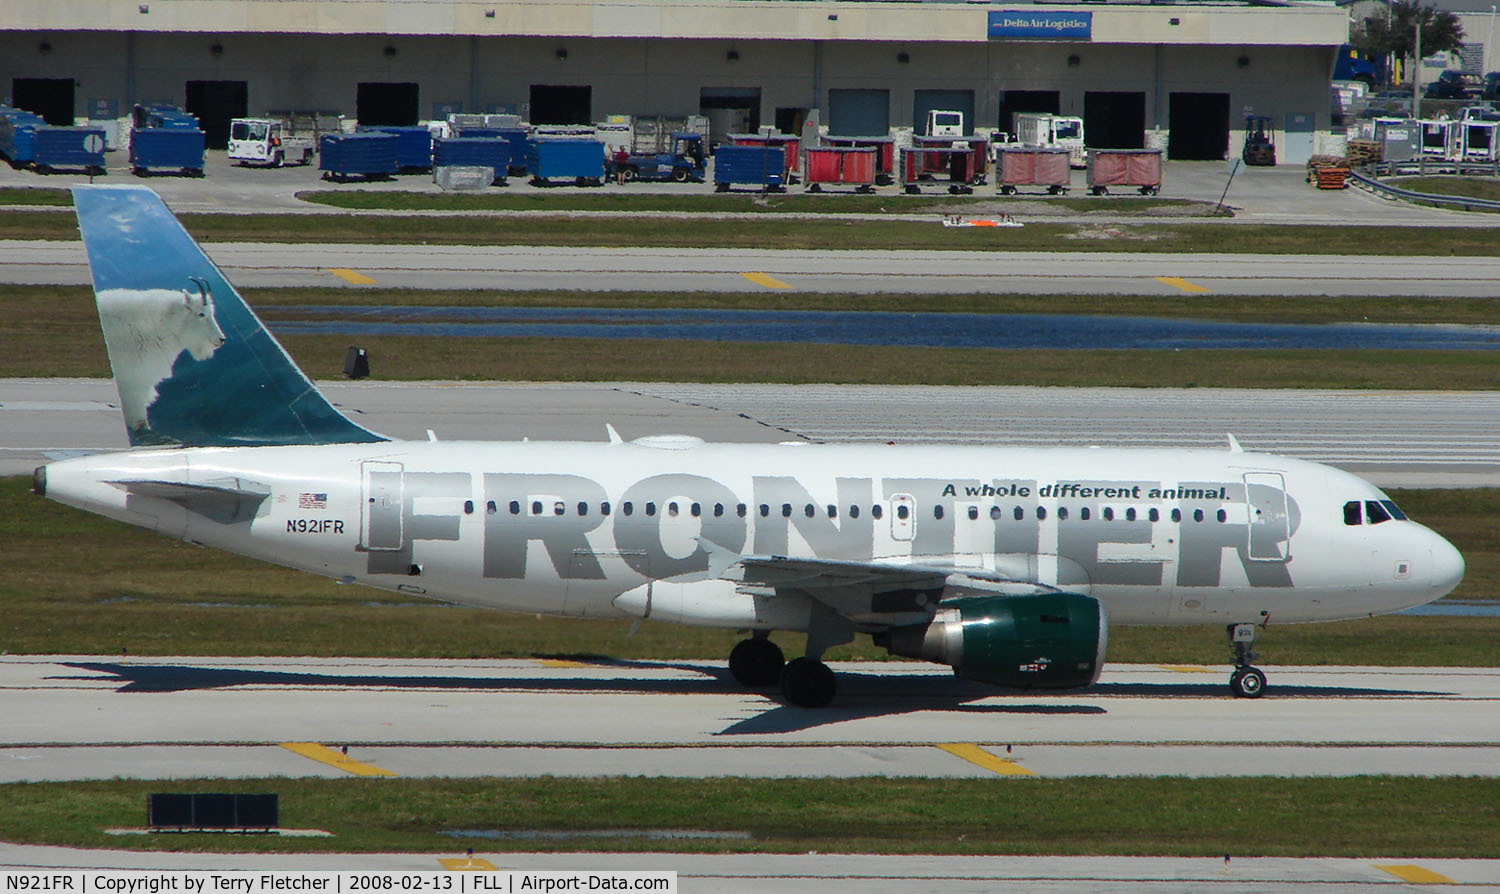 N921FR, 2003 Airbus A319-111 C/N 2010, Frontier A319s are always a pleasure to photograph